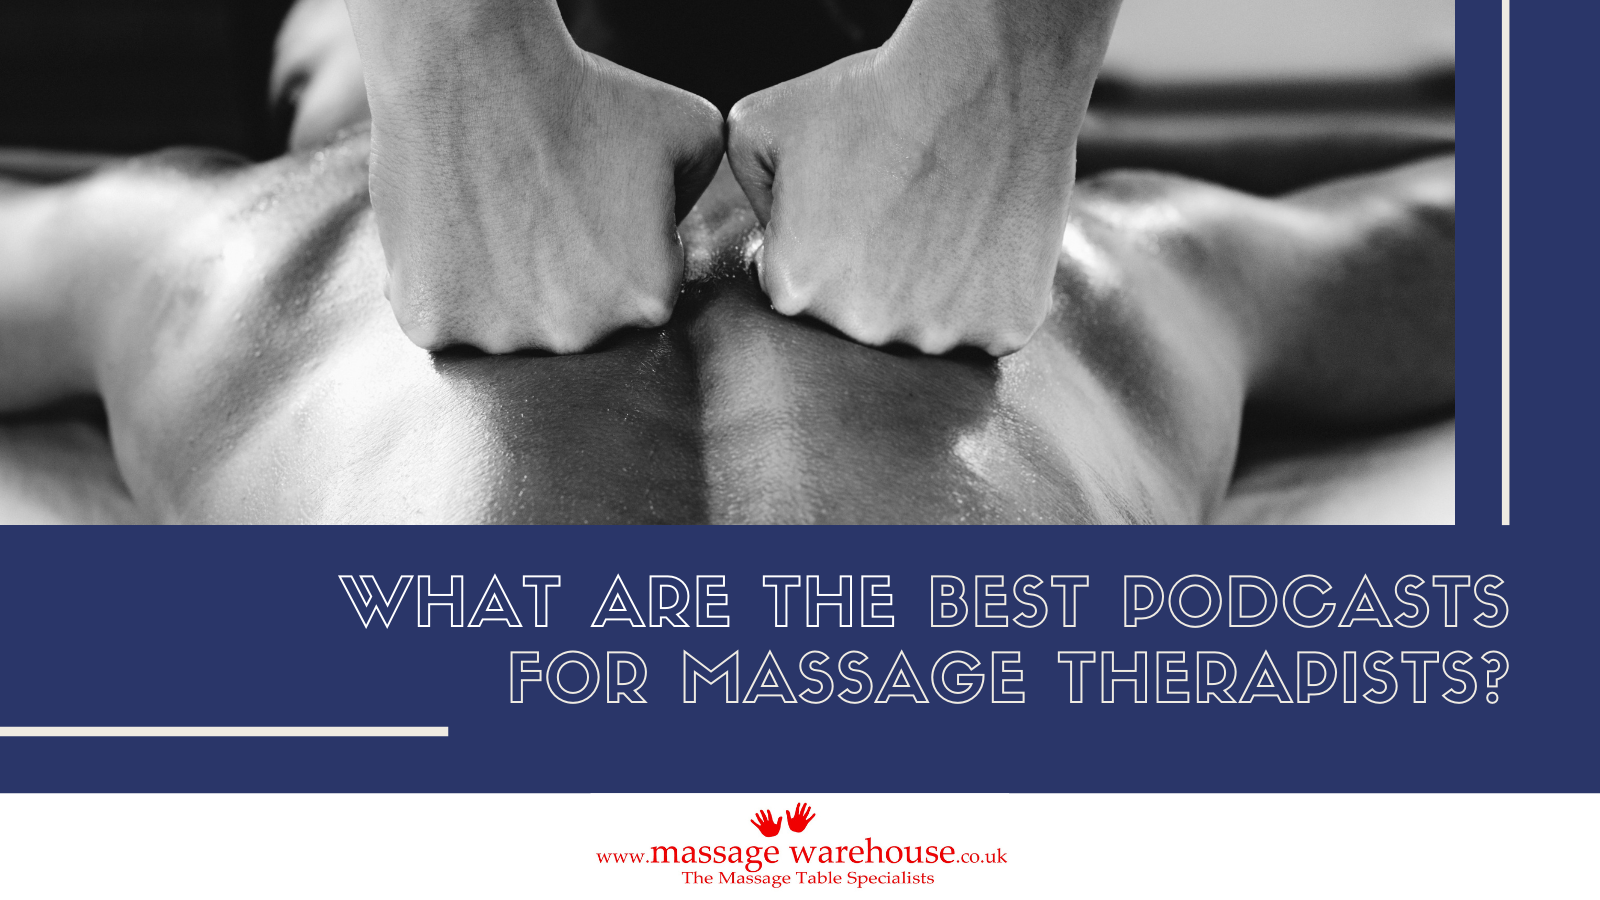 What are the best podcasts for massage therapists? - Massage Warehouse